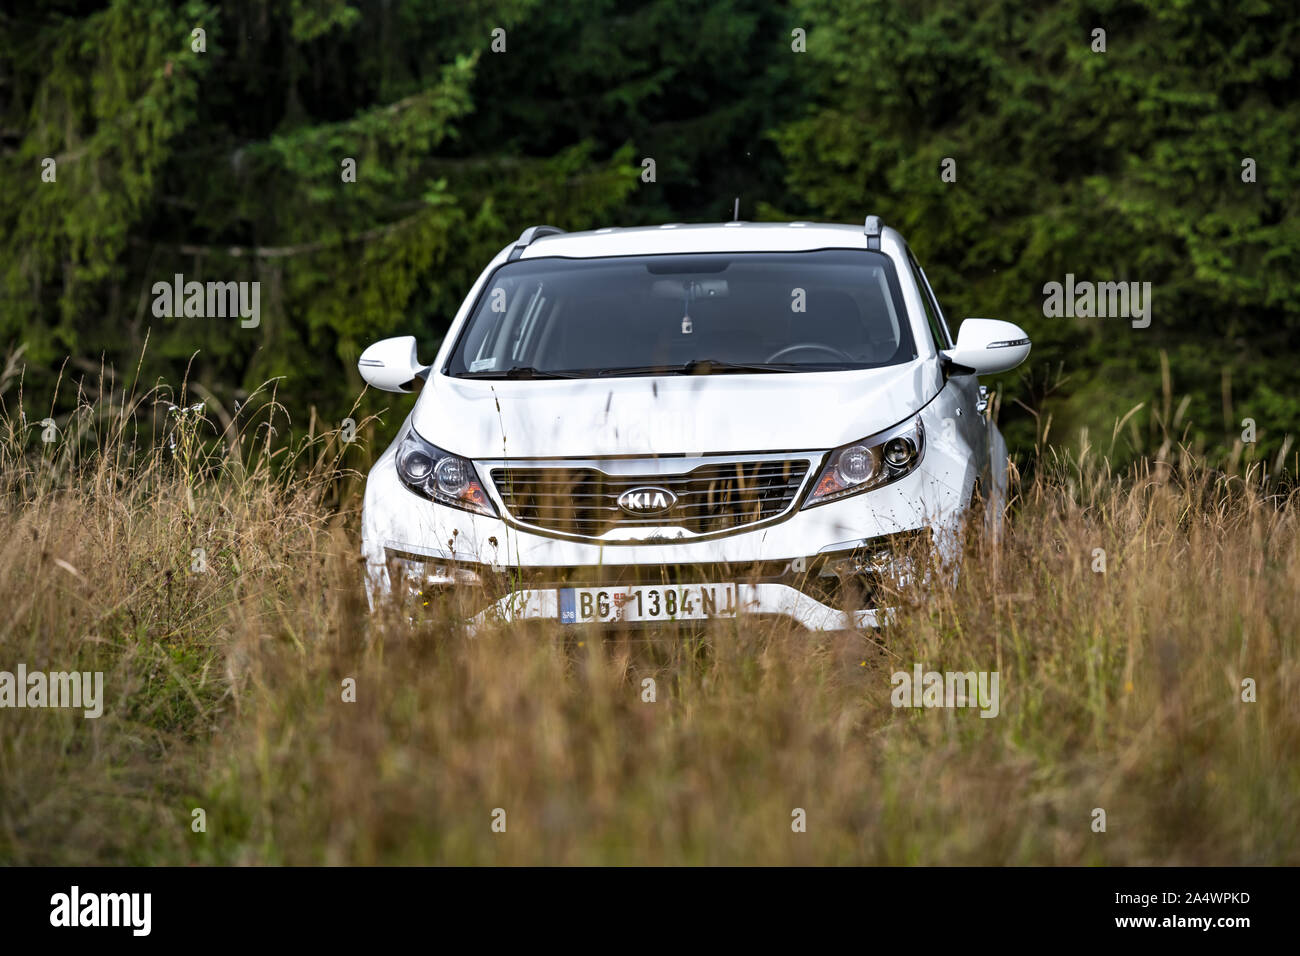 Kia Sportage 2.0 CRDI awd or 4x4, white color,  crossing a deep grass on country road,  AWD tehnology helps in this off road action. Stock Photo